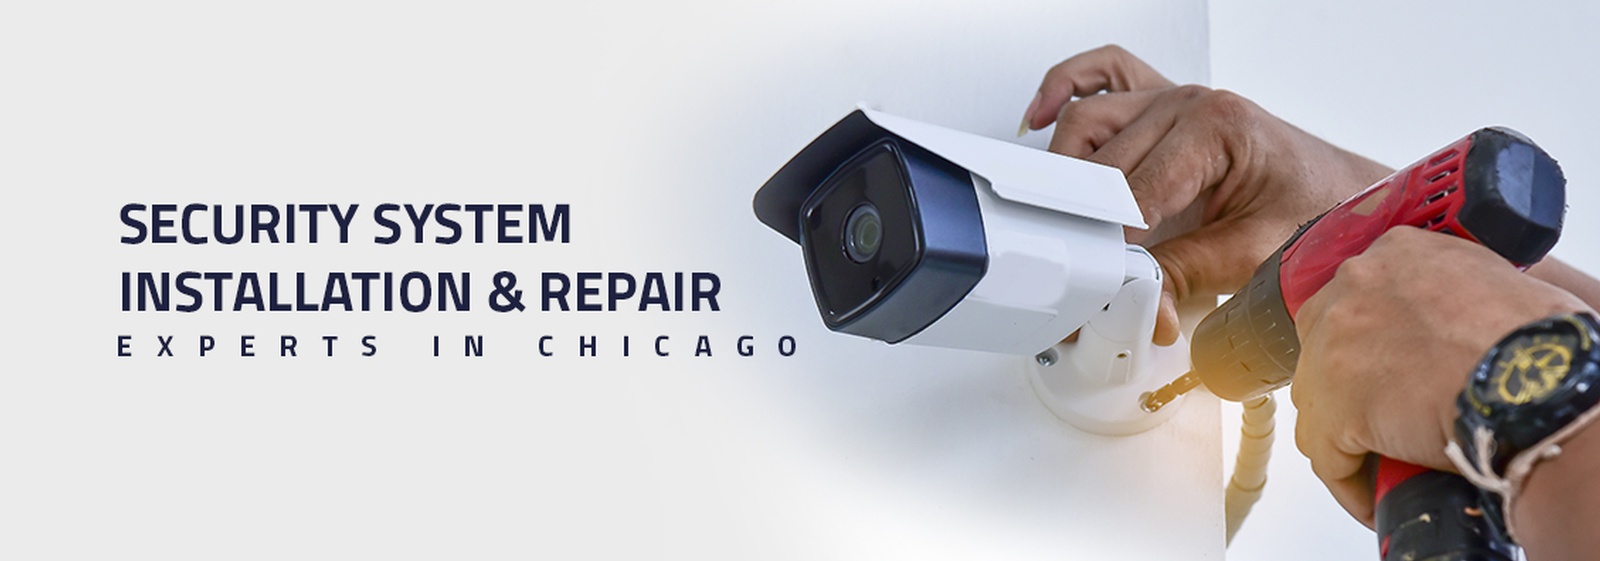 Security System Services Chicago